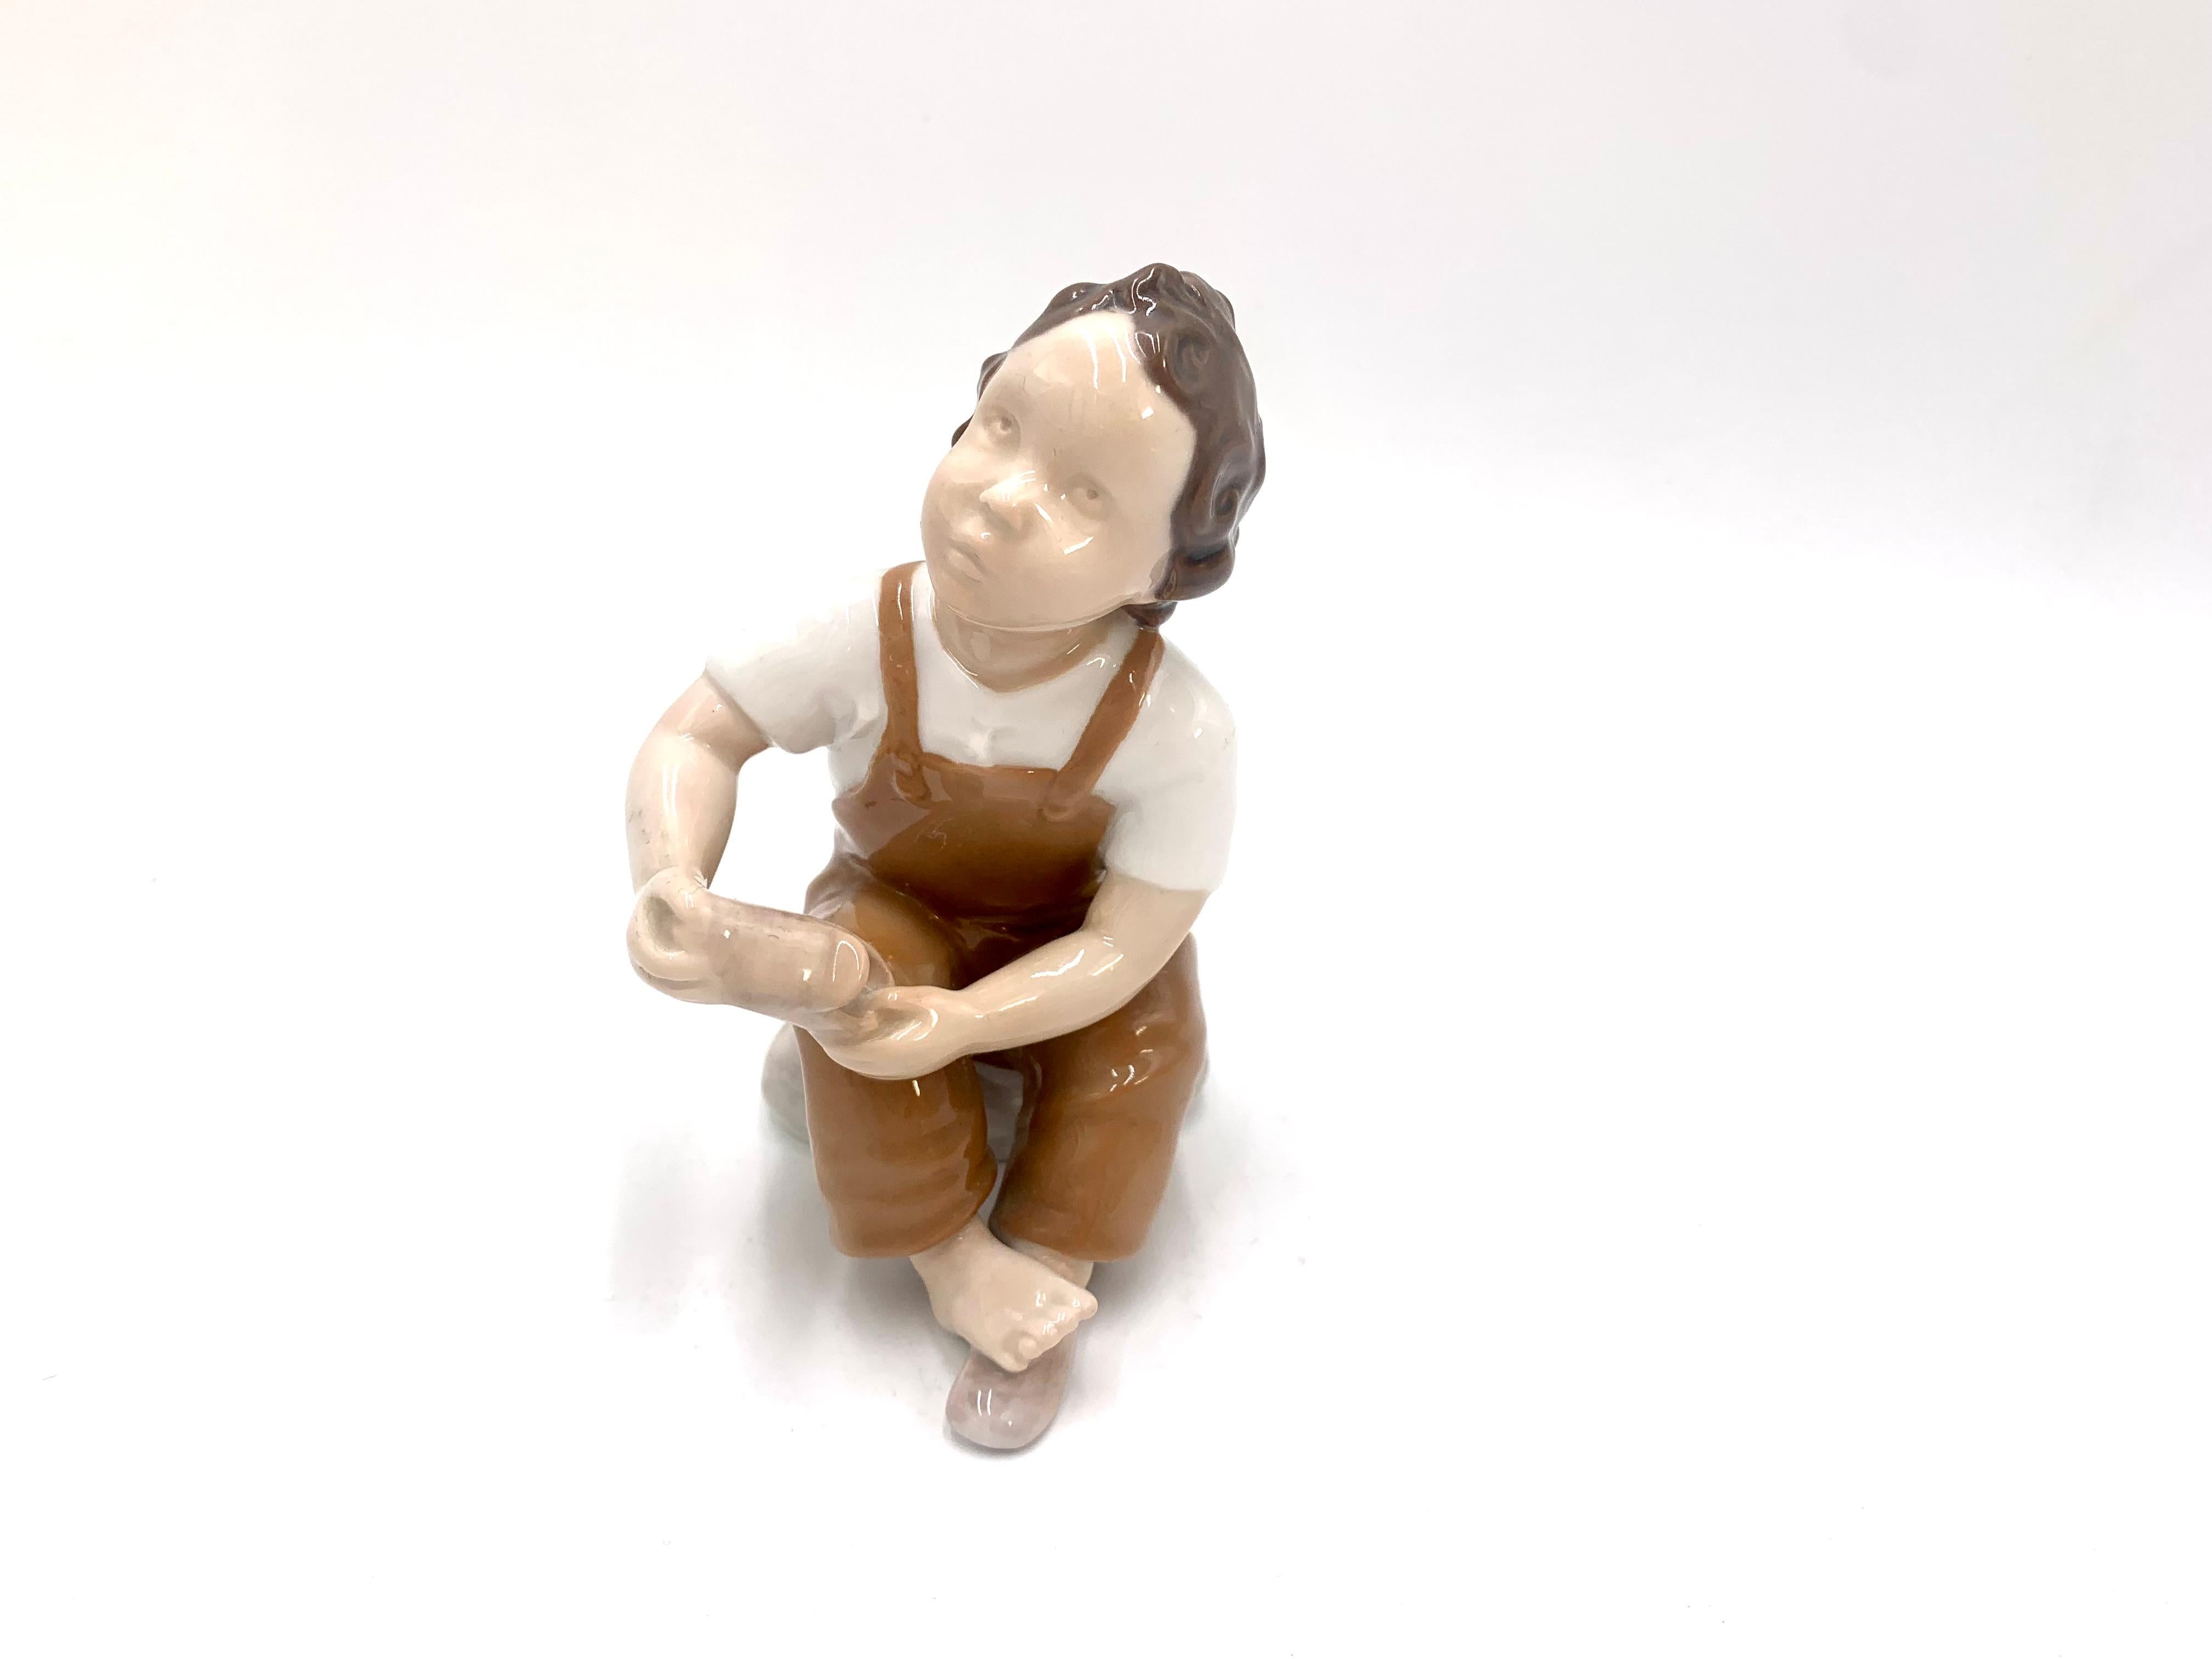 Porcelain figurine of a boy asking for help in putting on his shoe

Made in Denmark by Bing & Grondahl

Produced in 1958-1962

Model number # 2275

Very good condition, no damage

Measures: height 13.5cm width 7cm depth 10cm.